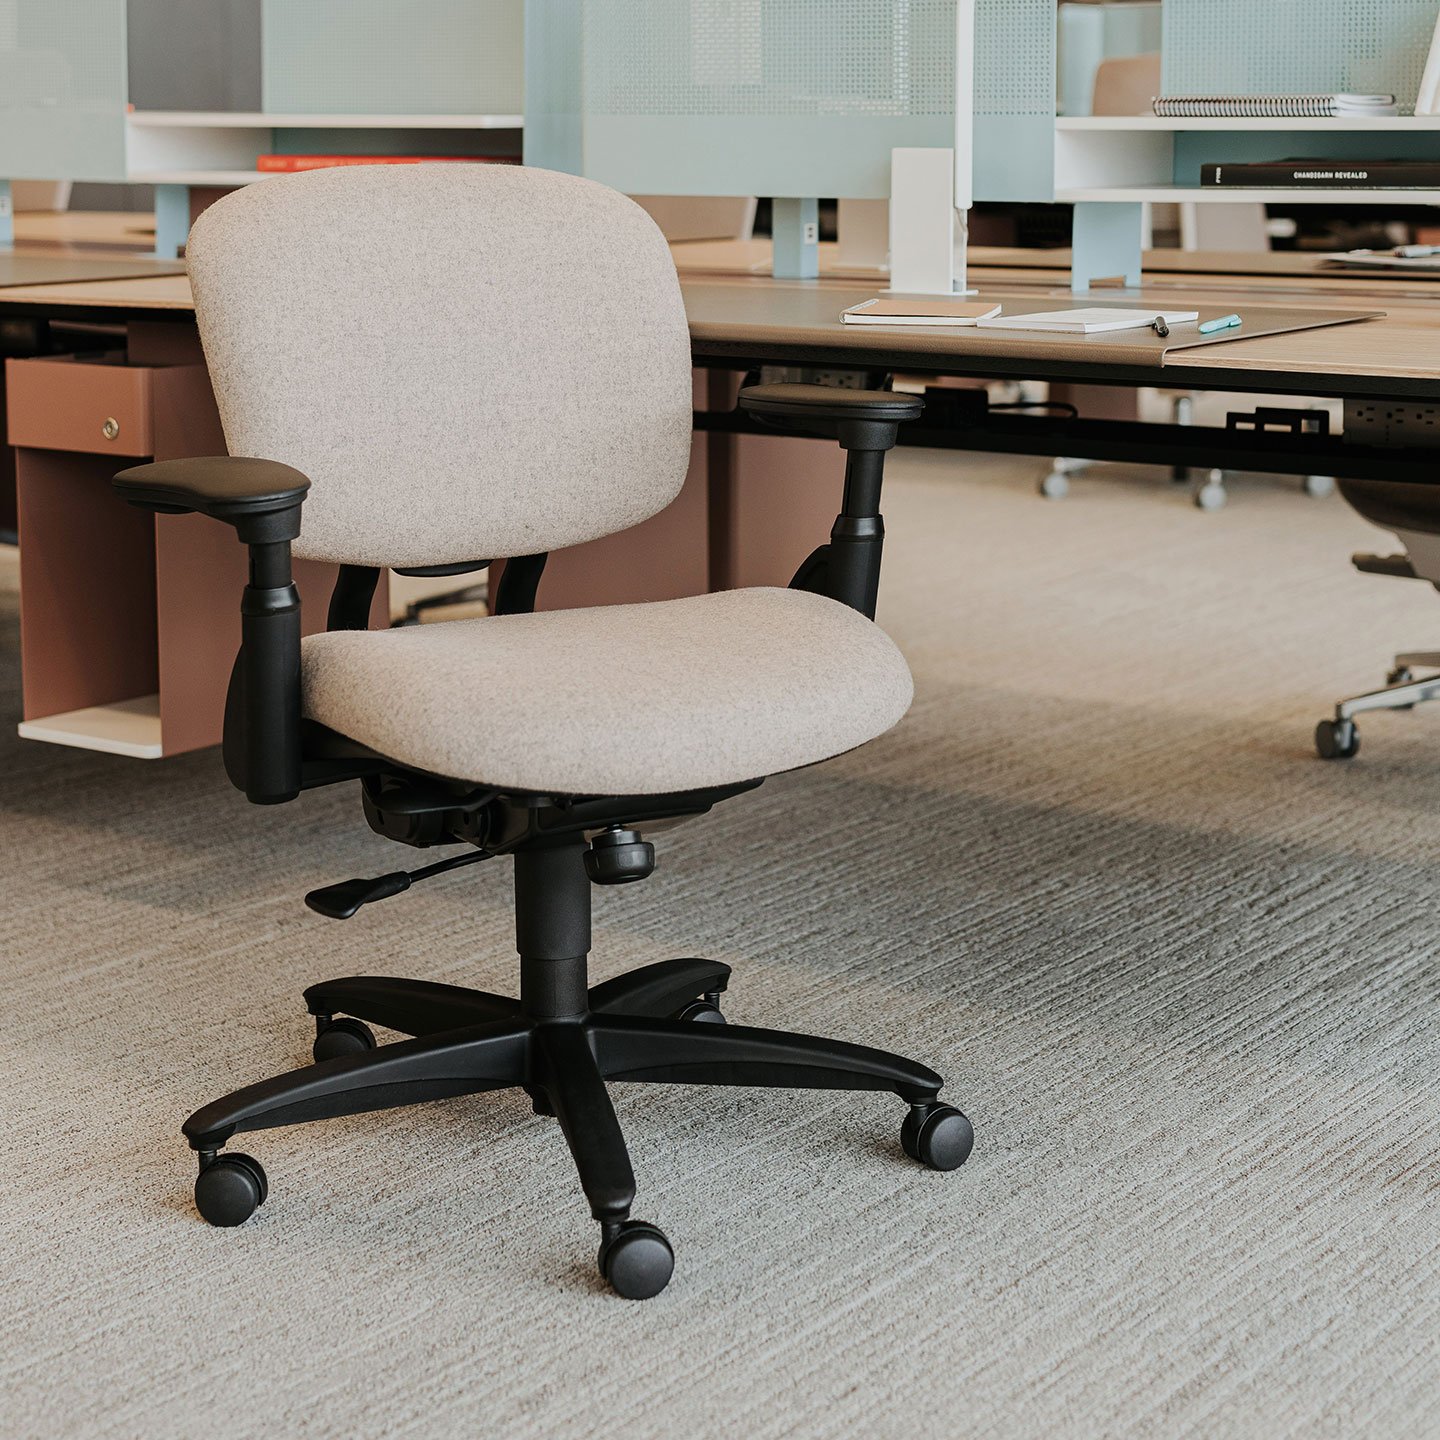 Improve Chair in tan at individual work space with Active Components 